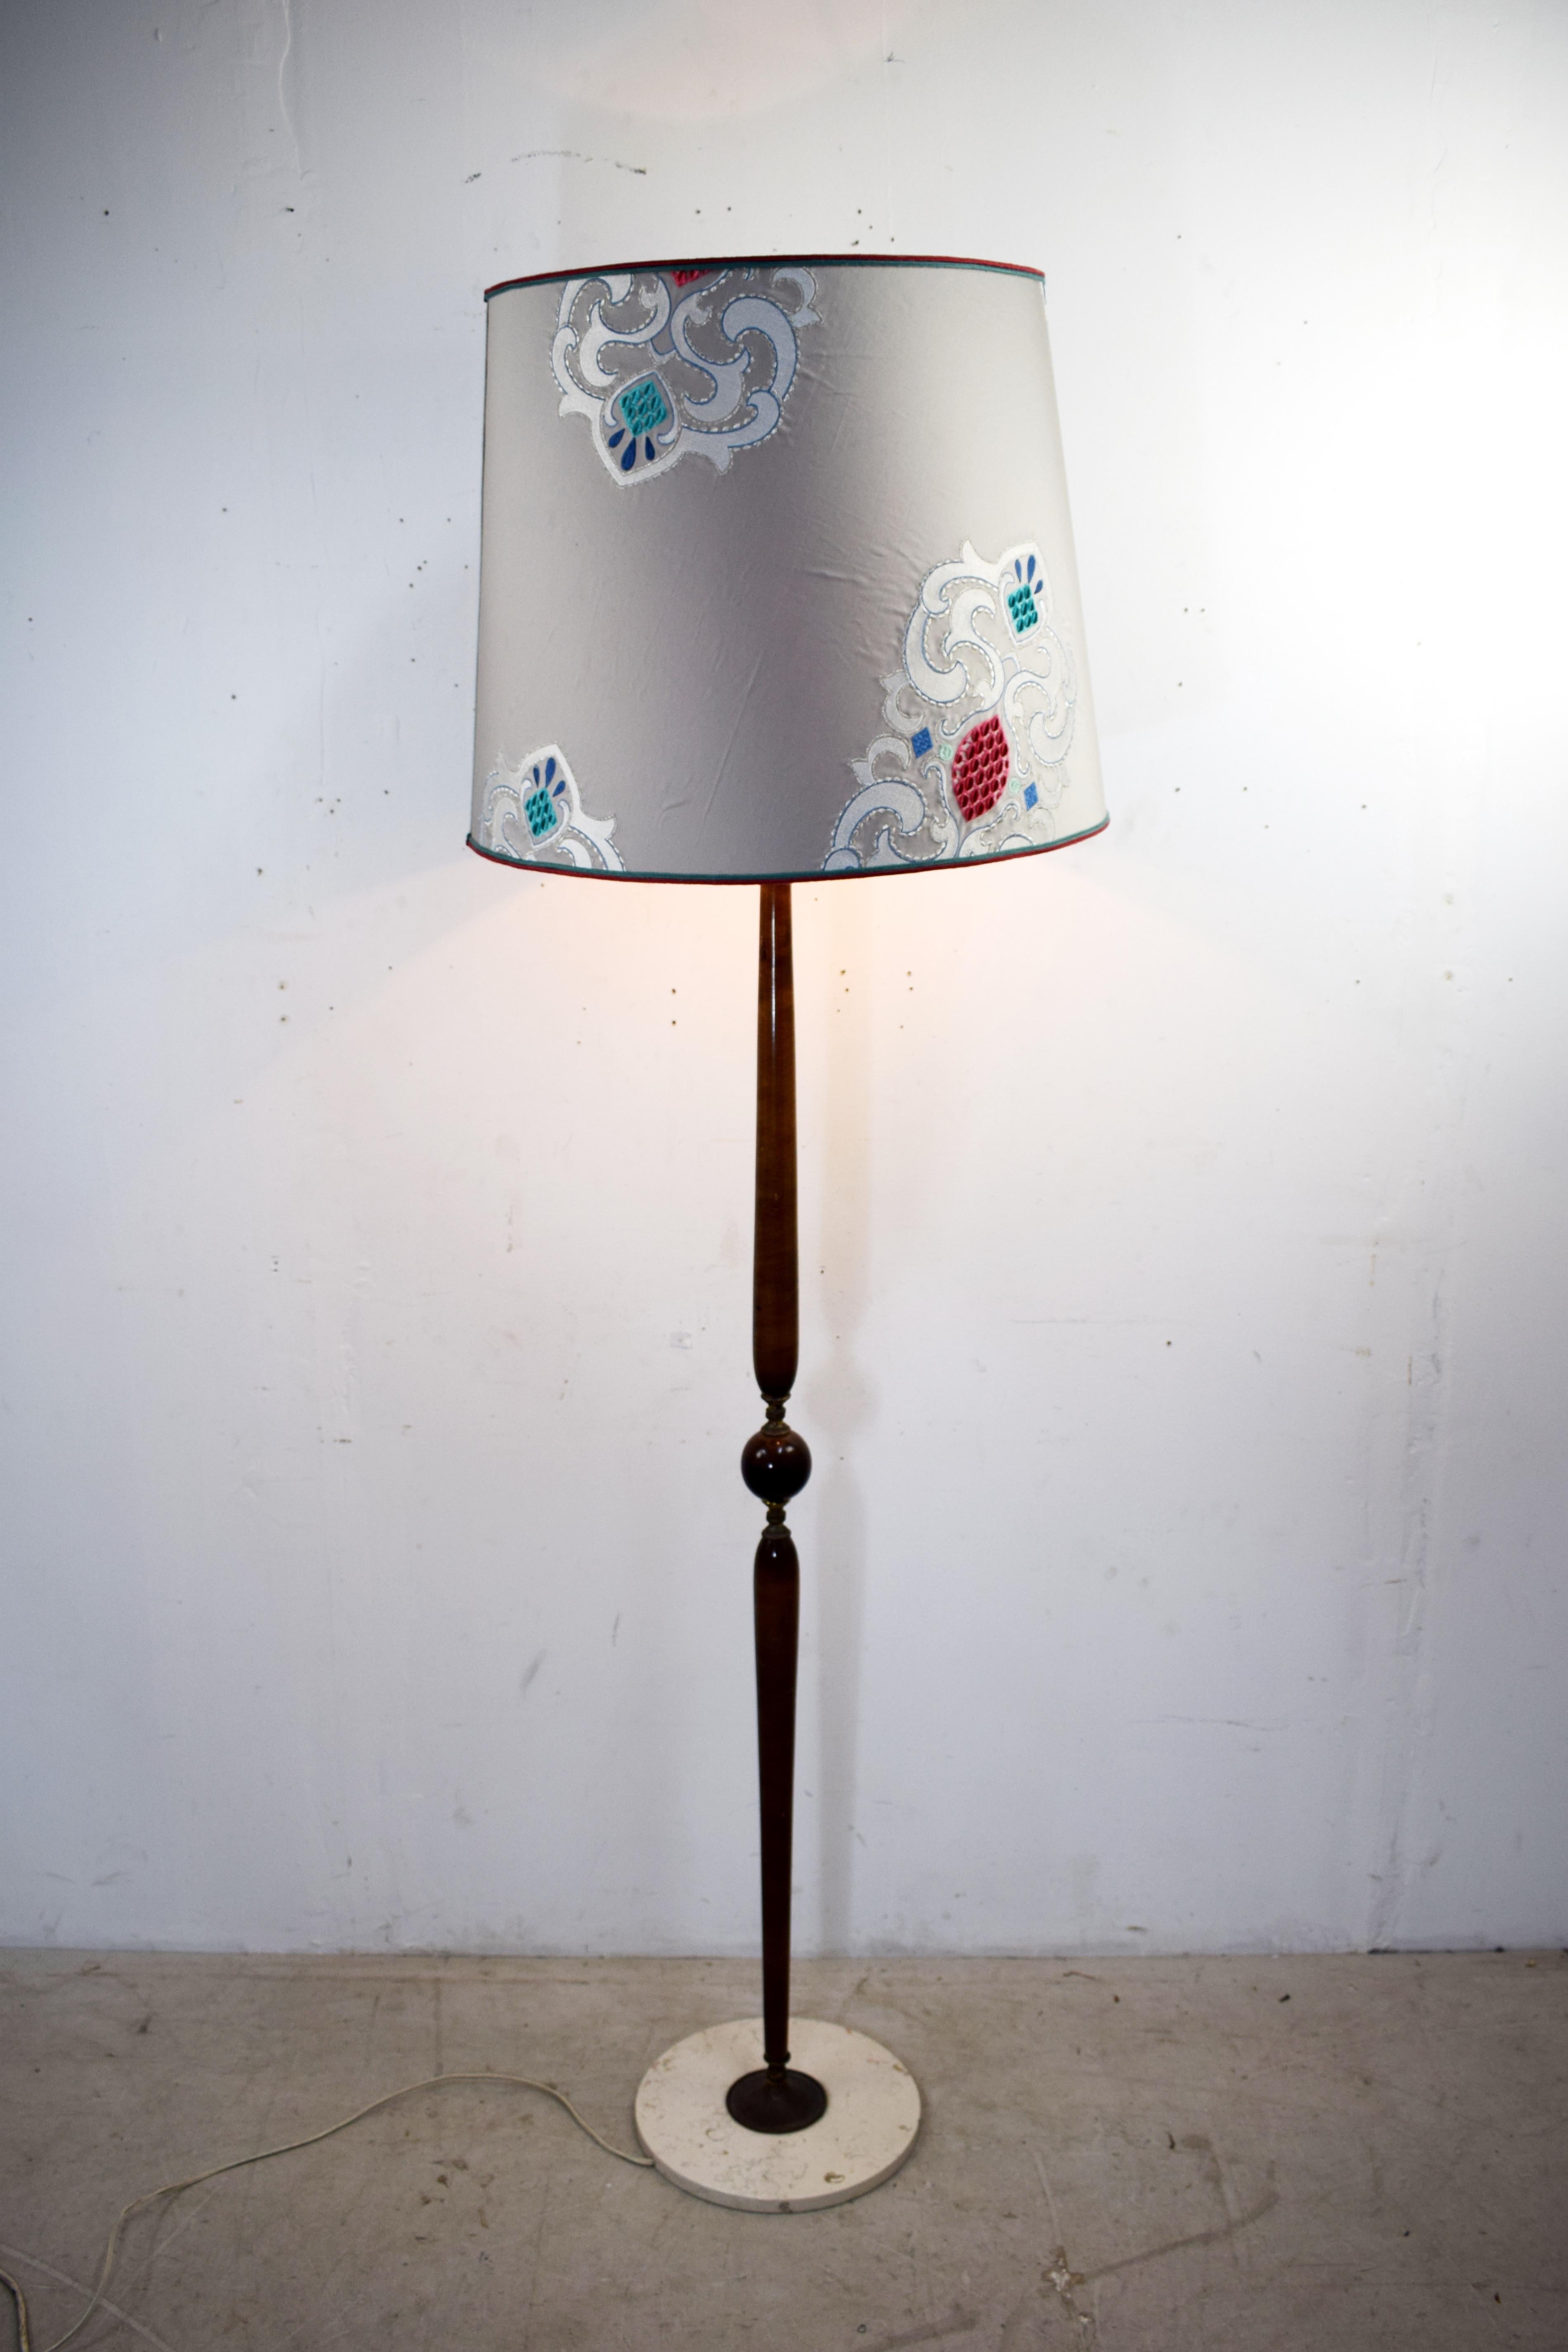 Italian floor lamp in the style of Cesare Lacca, 1940s.
Dimensions: H= 180 cm; D= 55 cm.